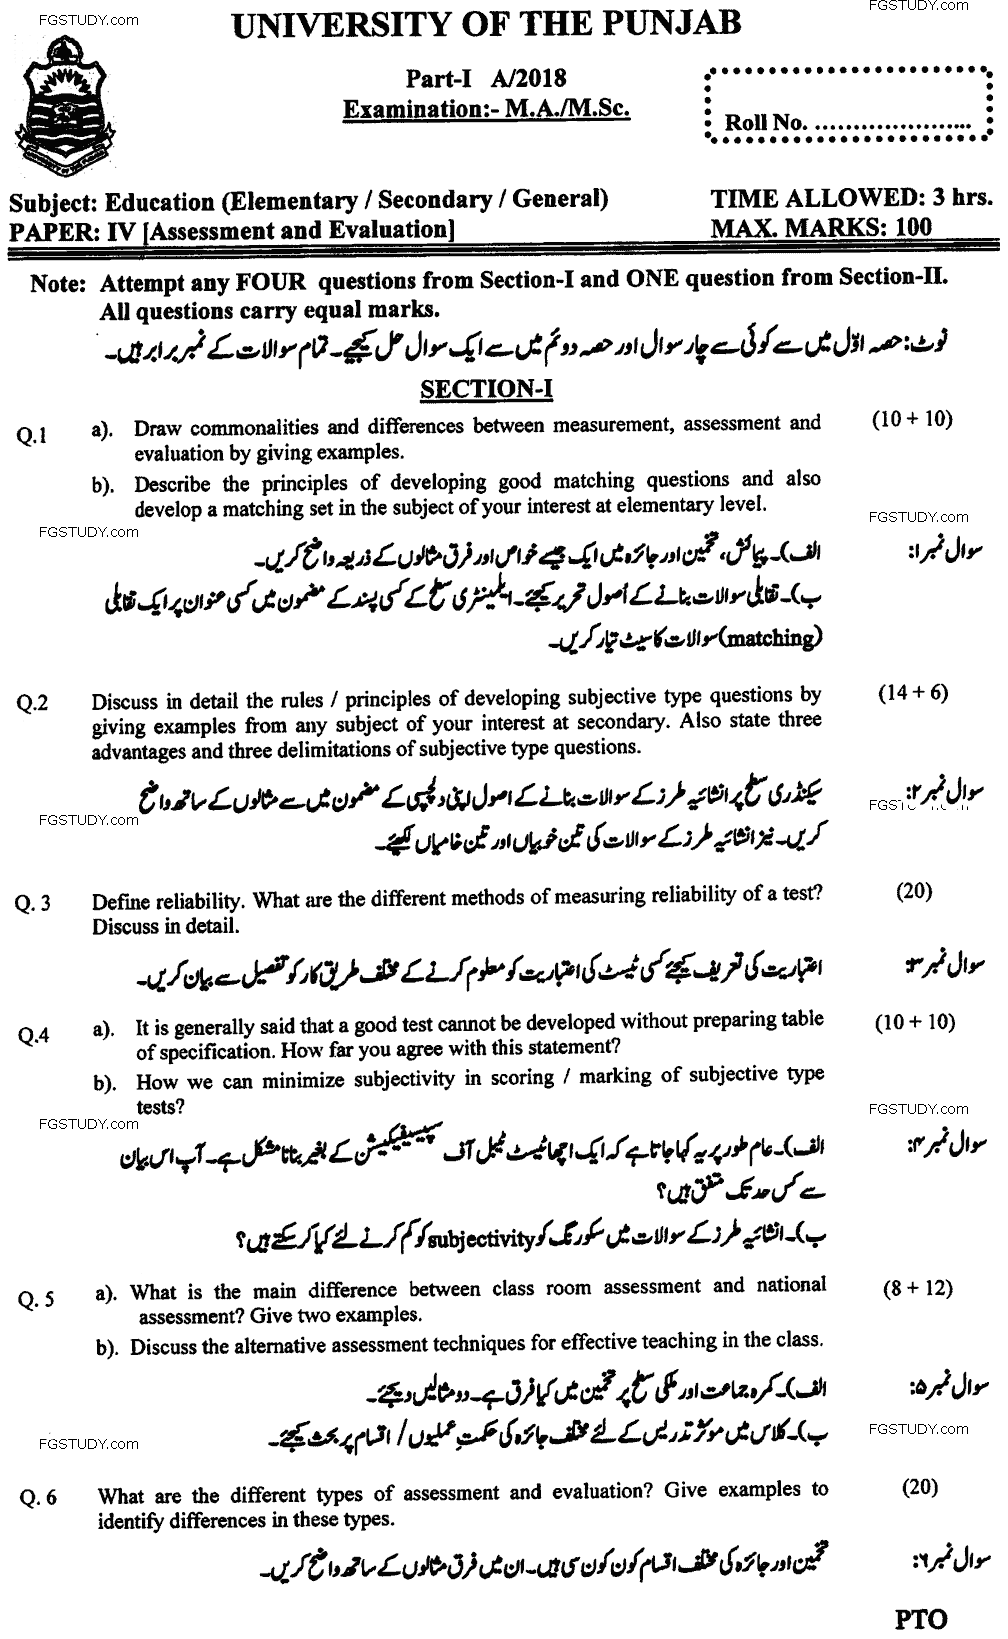 Ma Part 1 Education Elementary Assessment And Evaluation Past Paper 2018 Punjab University